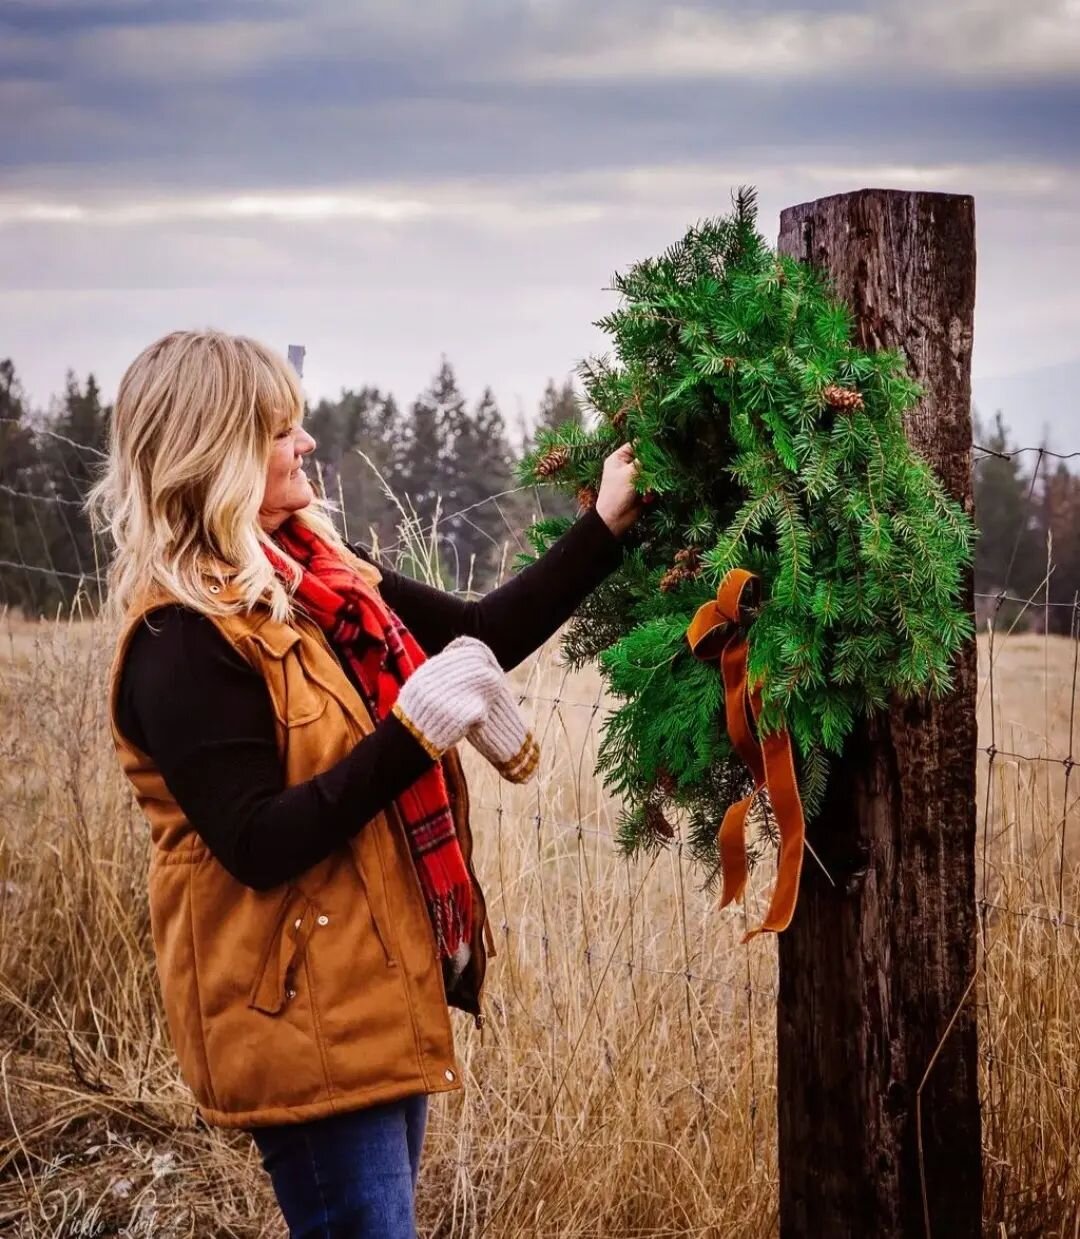 Who is ready to build a stunning Holiday Wreath with @9bwreaths while sipping on wine, enjoying Holiday treats, and hanging out with friends? 

We are! Please join us December 9th, $65 gets you all supplies and instructions, several fun options for y